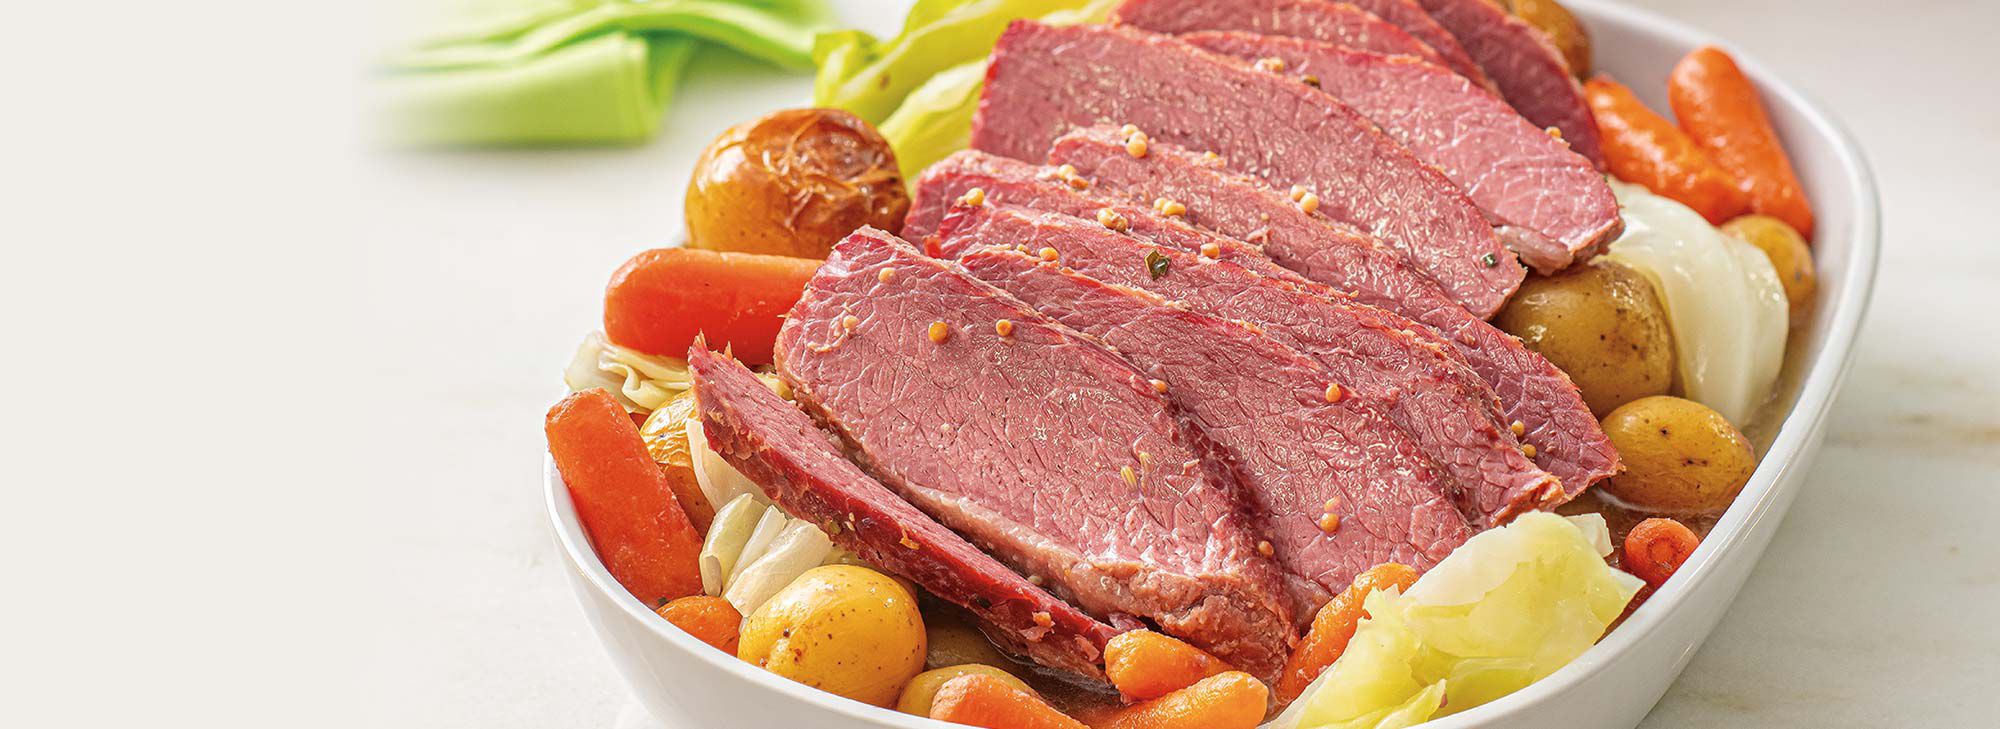 St. Patrick's Day Corned Beef Meal